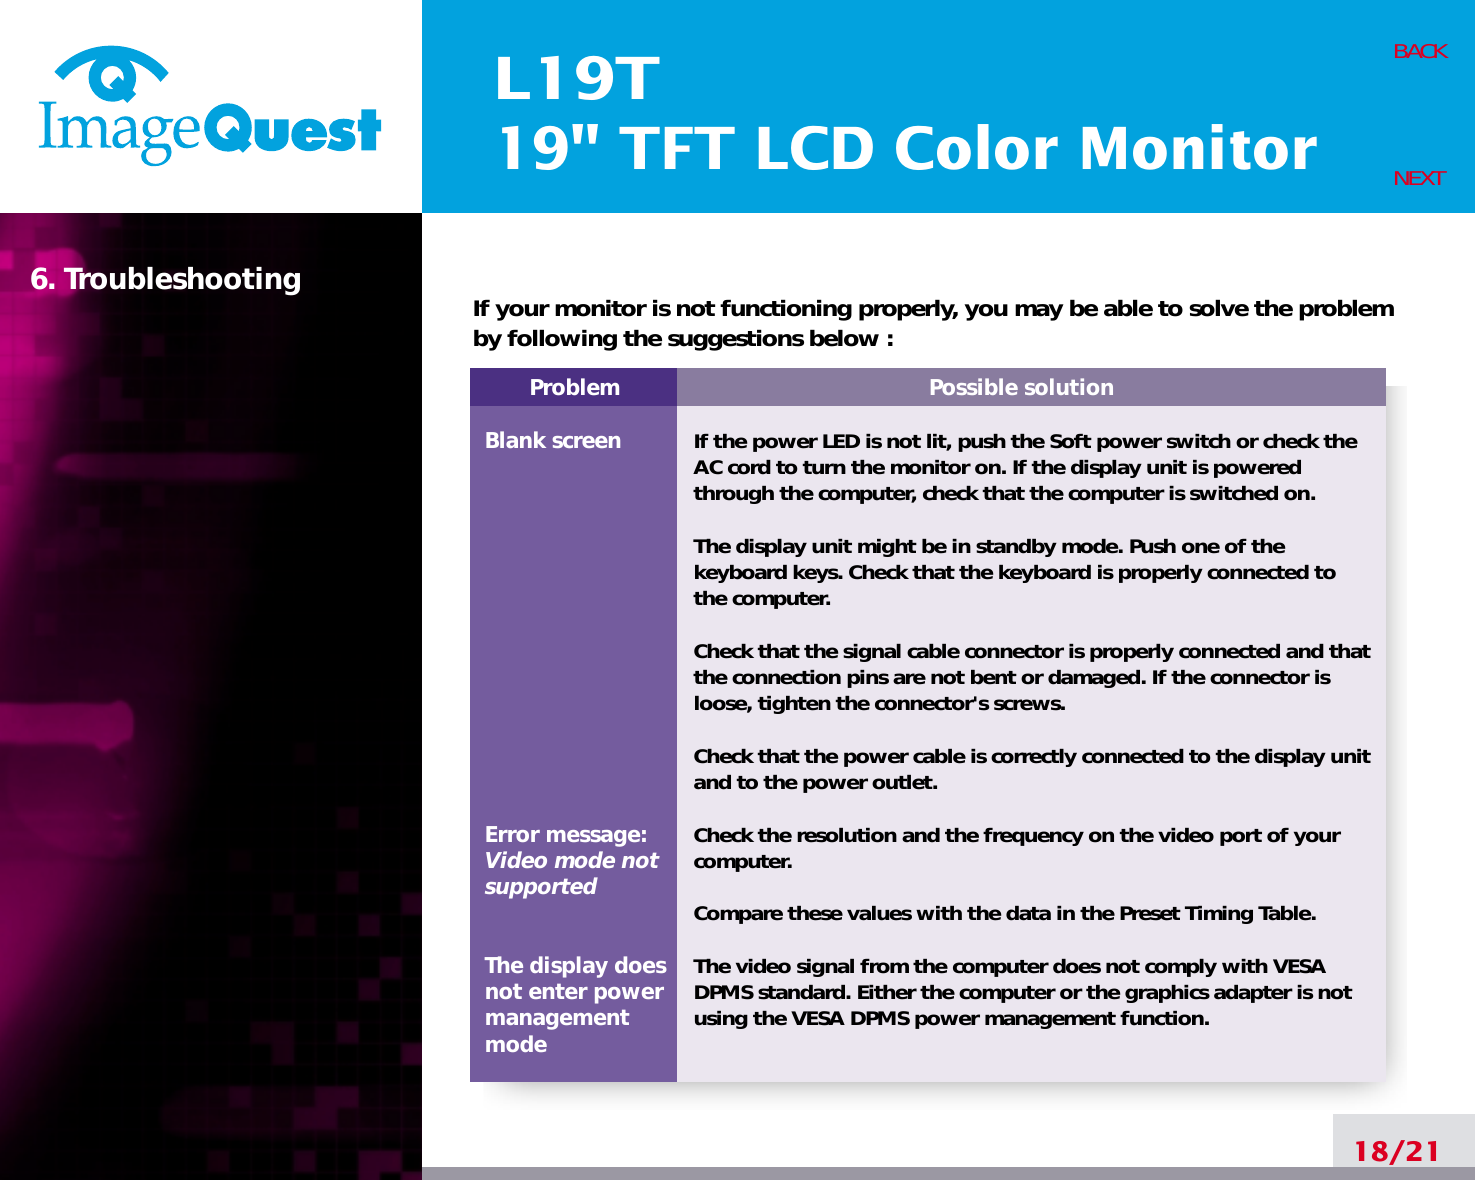 L19T19&quot; TFT LCD Color Monitor6. Troubleshooting18/21BACKNEXTProblemBlank screenError message:Video mode notsupportedThe display does not enter power managementmodePossible solutionIf the power LED is not lit, push the Soft power switch or check theAC cord to turn the monitor on. If the display unit is poweredthrough the computer, check that the computer is switched on.The display unit might be in standby mode. Push one of thekeyboard keys. Check that the keyboard is properly connected tothe computer.Check that the signal cable connector is properly connected and thatthe connection pins are not bent or damaged. If the connector isloose, tighten the connector&apos;s screws.Check that the power cable is correctly connected to the display unitand to the power outlet. Check the resolution and the frequency on the video port of yourcomputer.Compare these values with the data in the Preset Timing Table.The video signal from the computer does not comply with VESADPMS standard. Either the computer or the graphics adapter is notusing the VESA DPMS power management function.If your monitor is not functioning properly, you may be able to solve the problemby following the suggestions below :